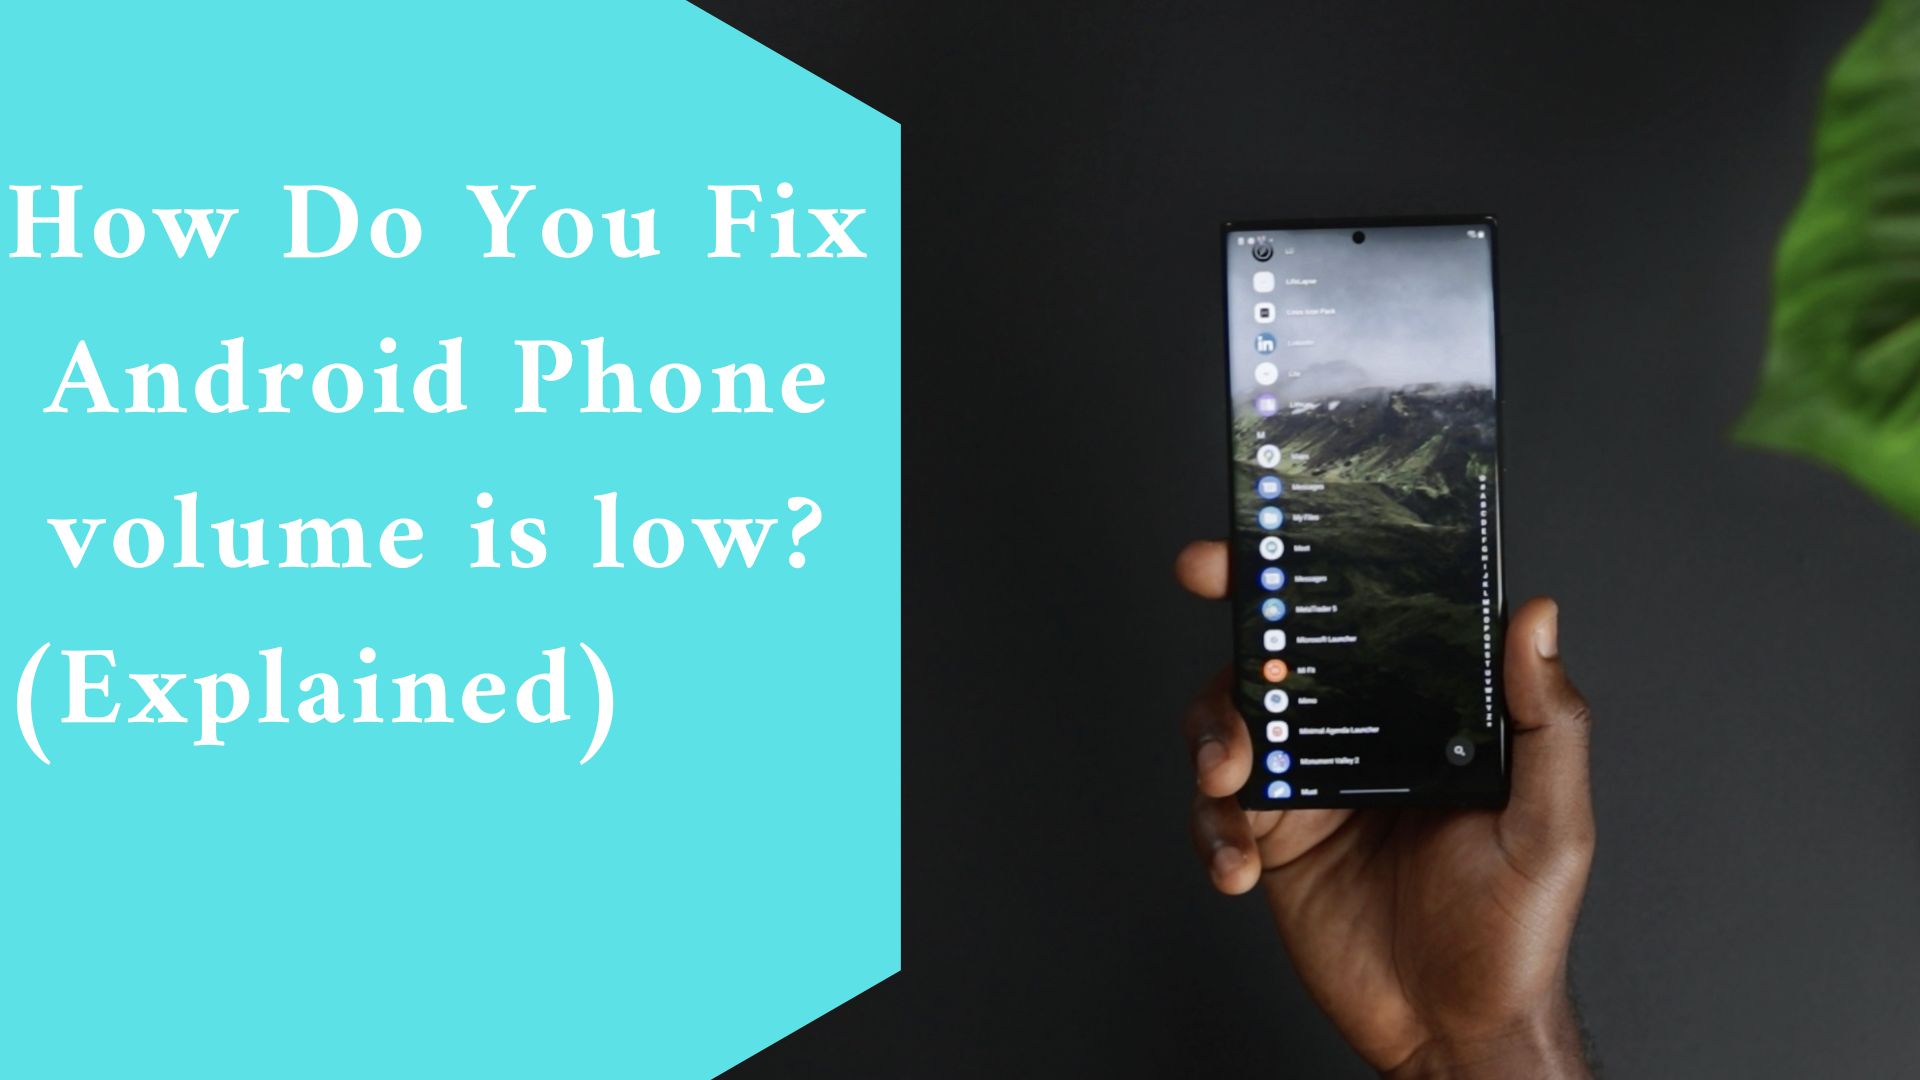 How Do You Fix Android Phone volume is low? (Explained)